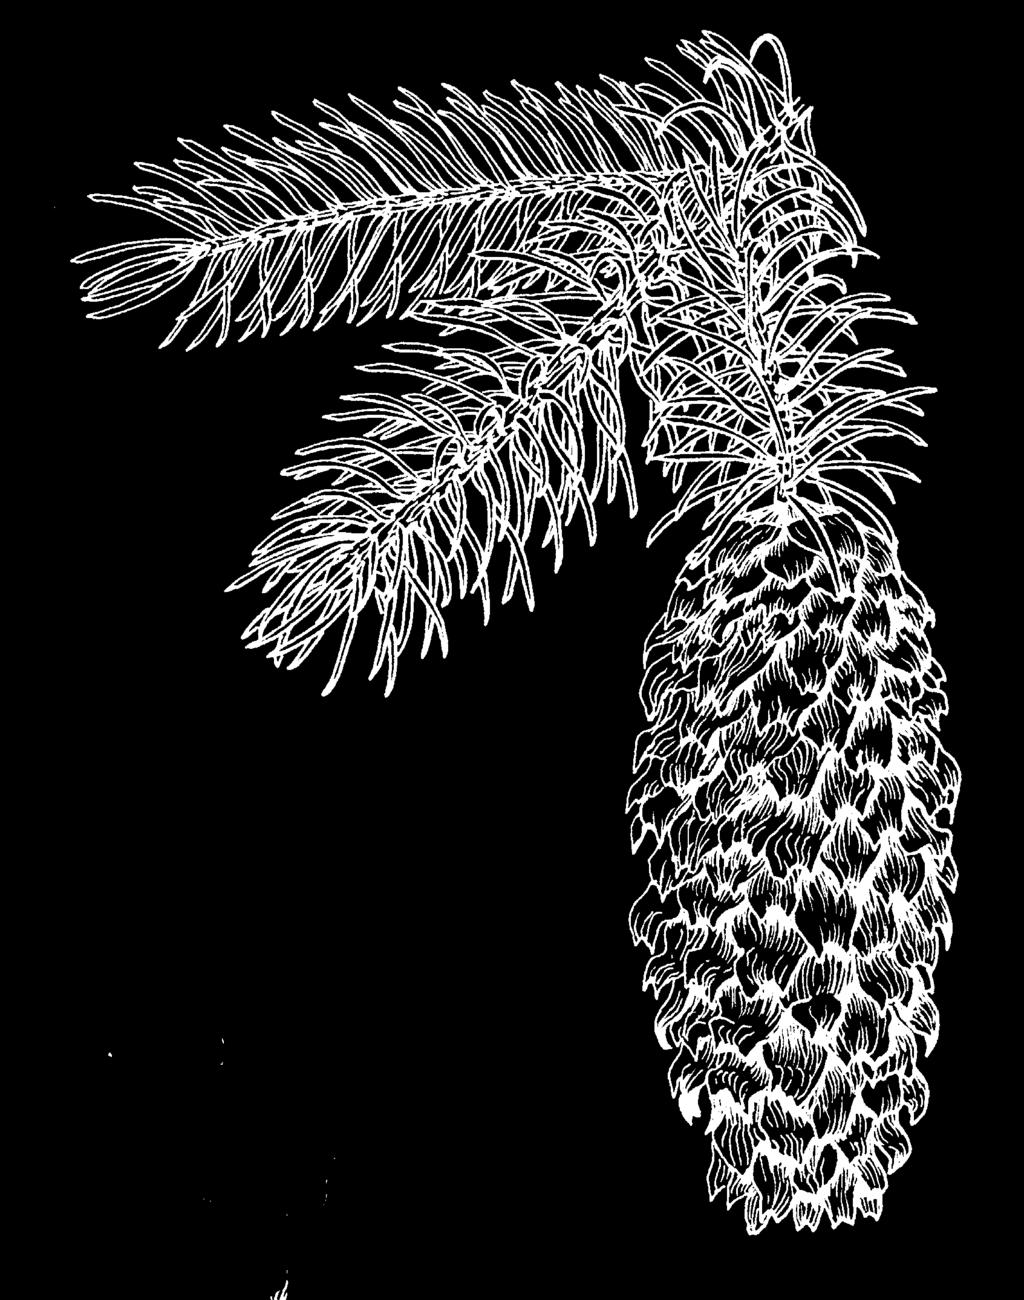 projections? Yes? Go to 10. Leaf cross-section, enlarged 9. Are the cones 1" to 2 ½" long; and the needle tips somewhat blunt? Yes? It is an Engelmann spruce (Picea engelmannii).